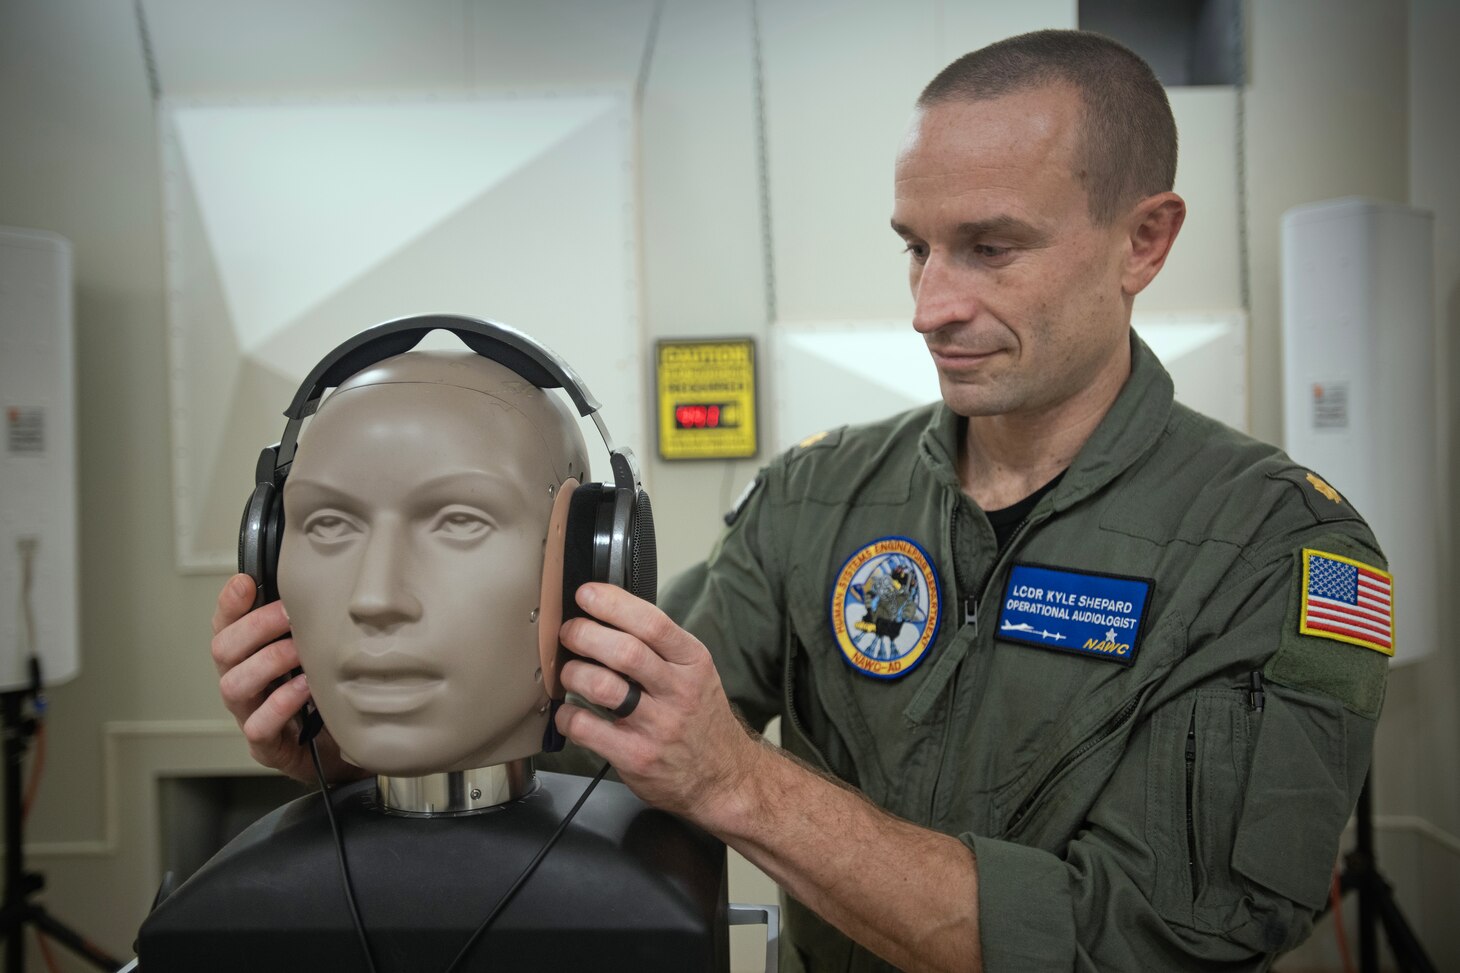 Lt. Cmdr. Kyle Shepard, resident audiologist and researcher at the Naval Air Warfare Center Aircraft Division, demonstrates audio testing in an anechoic chamber at NAS Patuxent River,
Maryland.